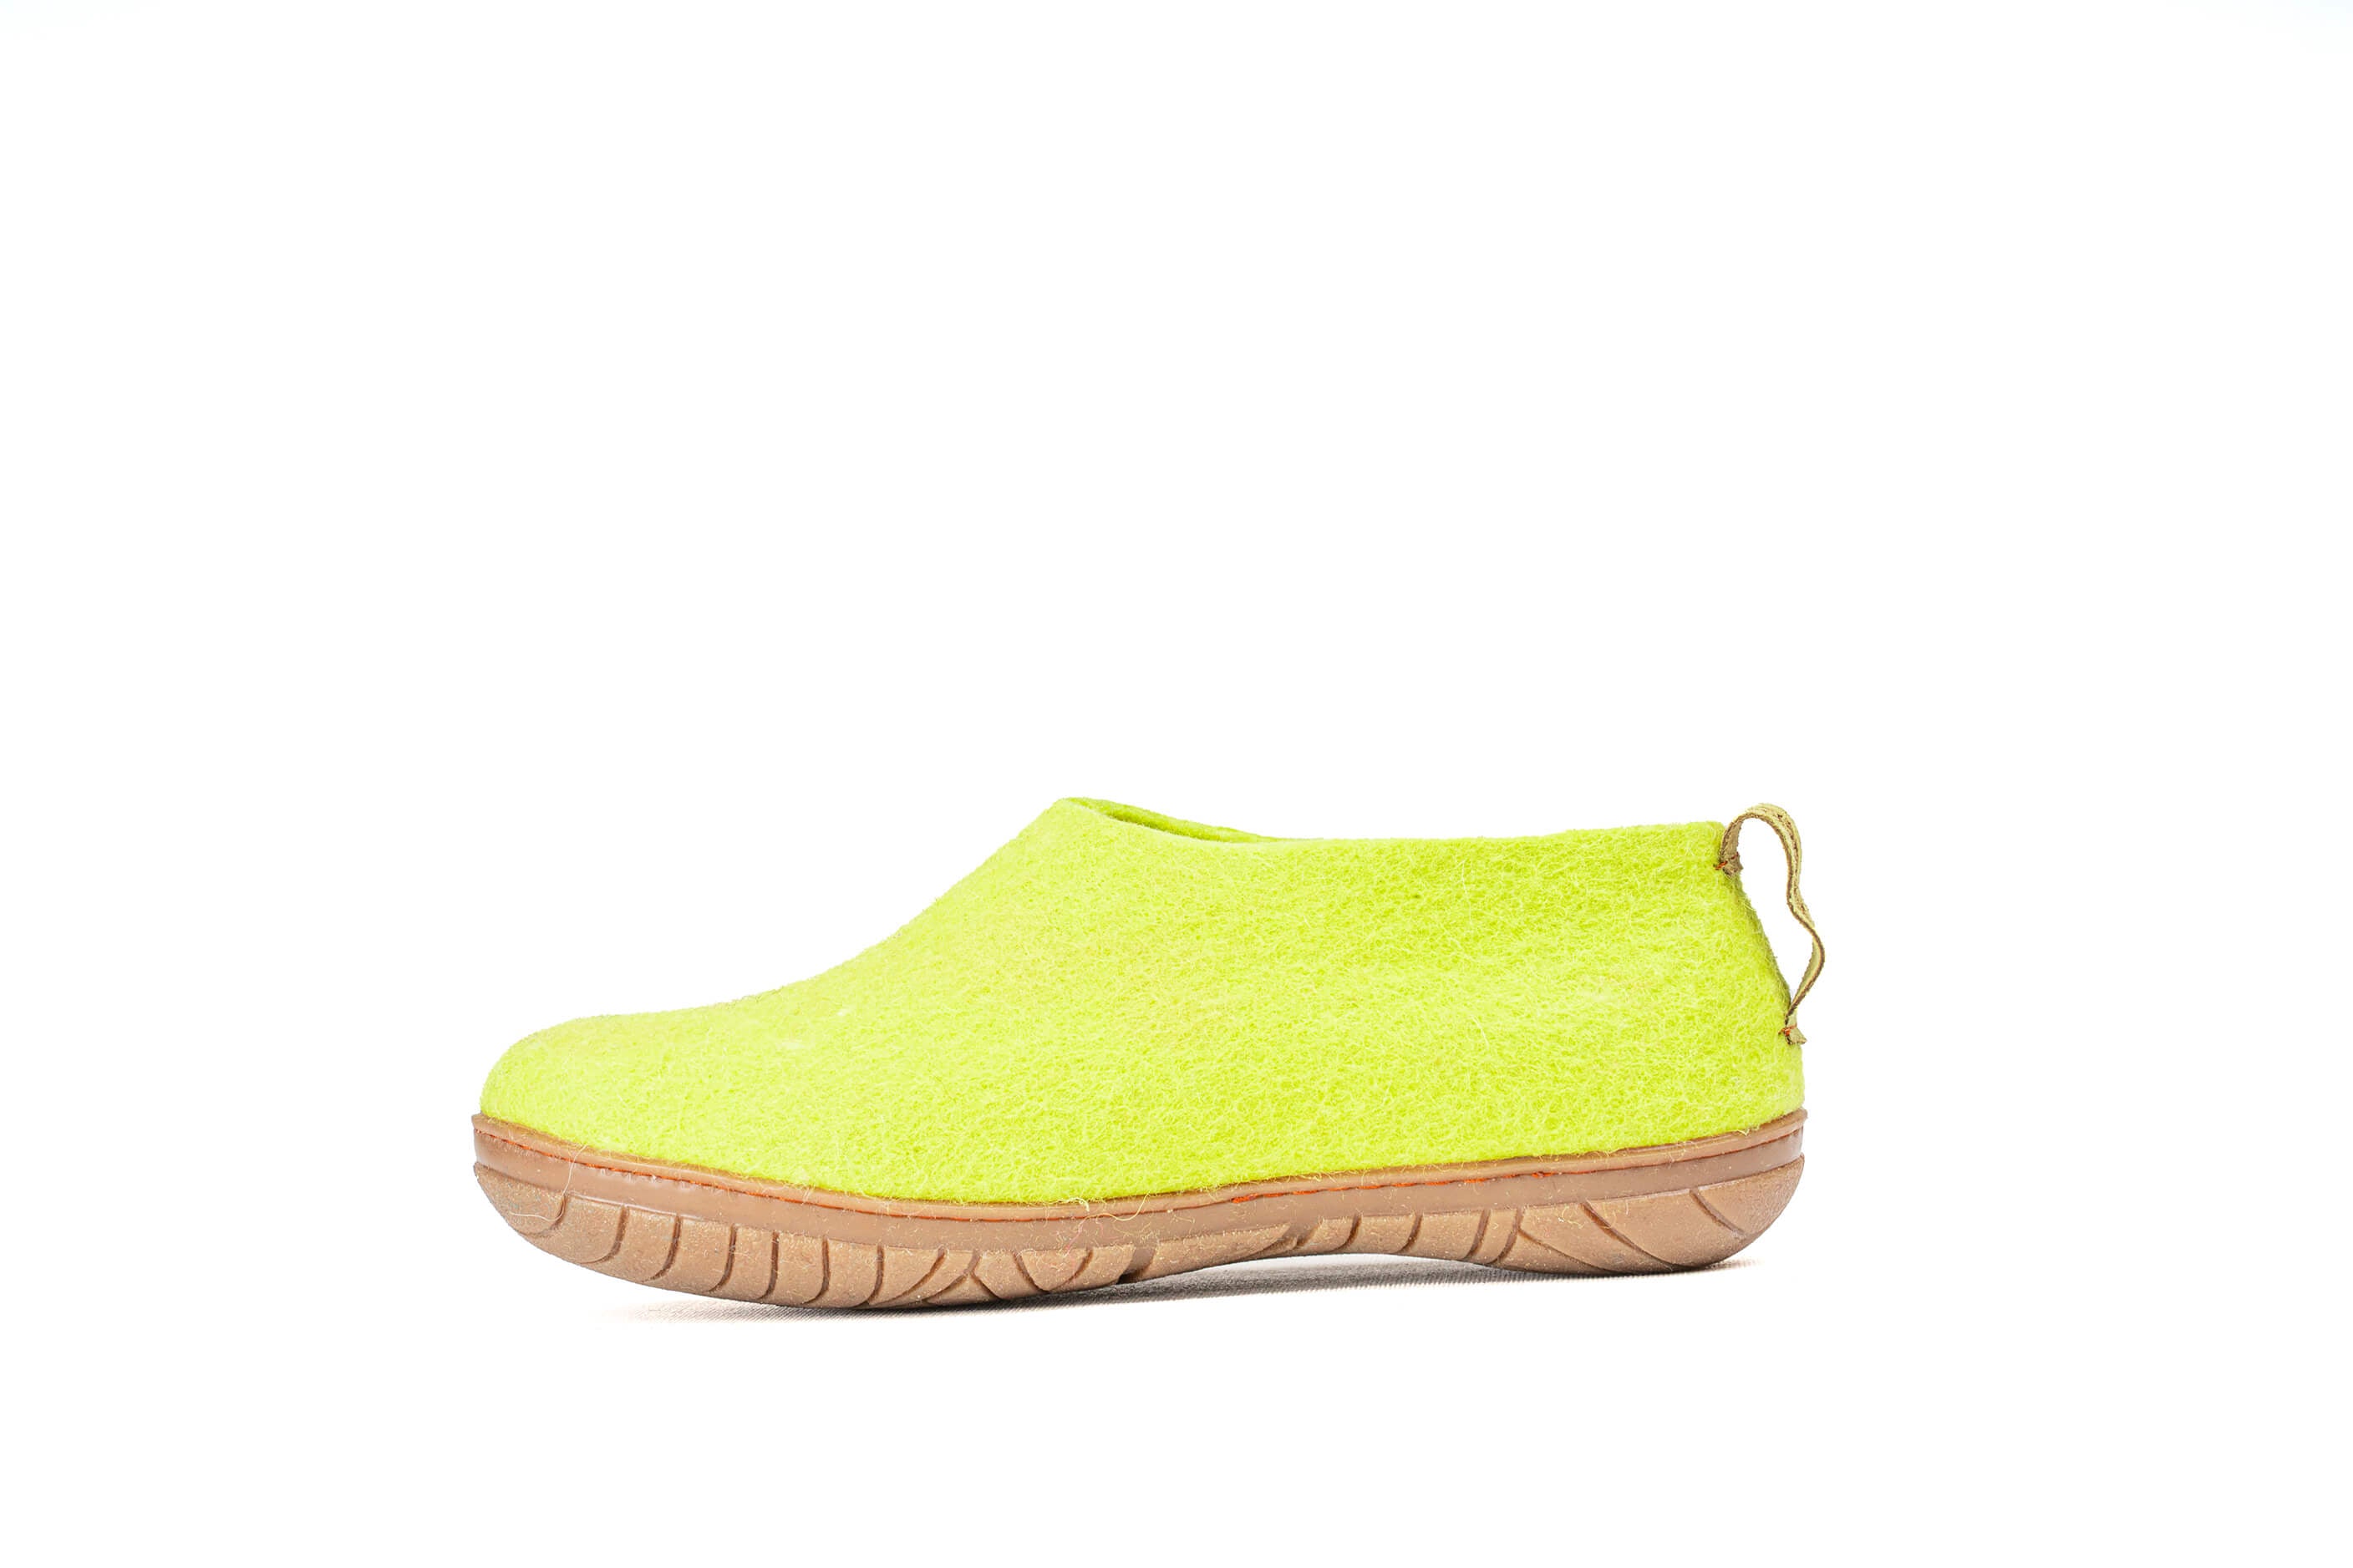 Outdoor Shoes With Rubber Sole - Lime Green